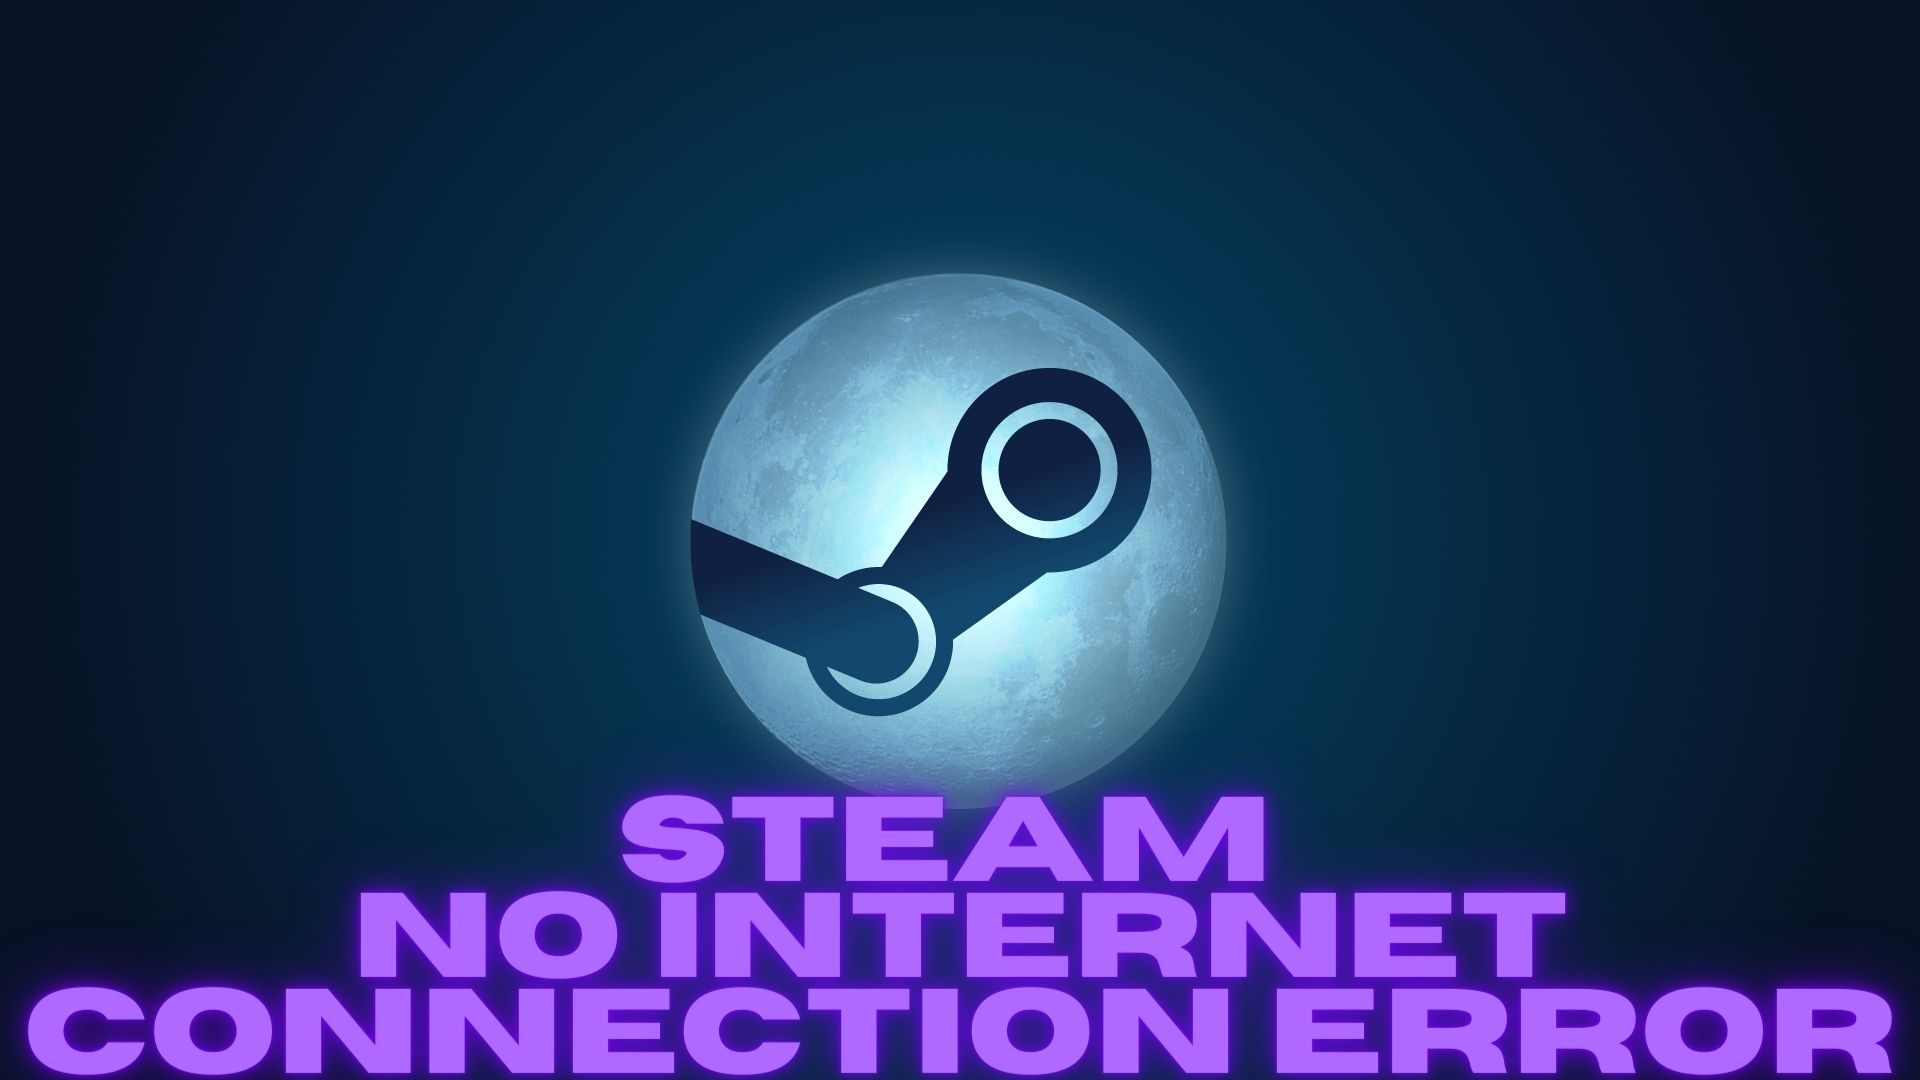 Industries that use steam фото 85